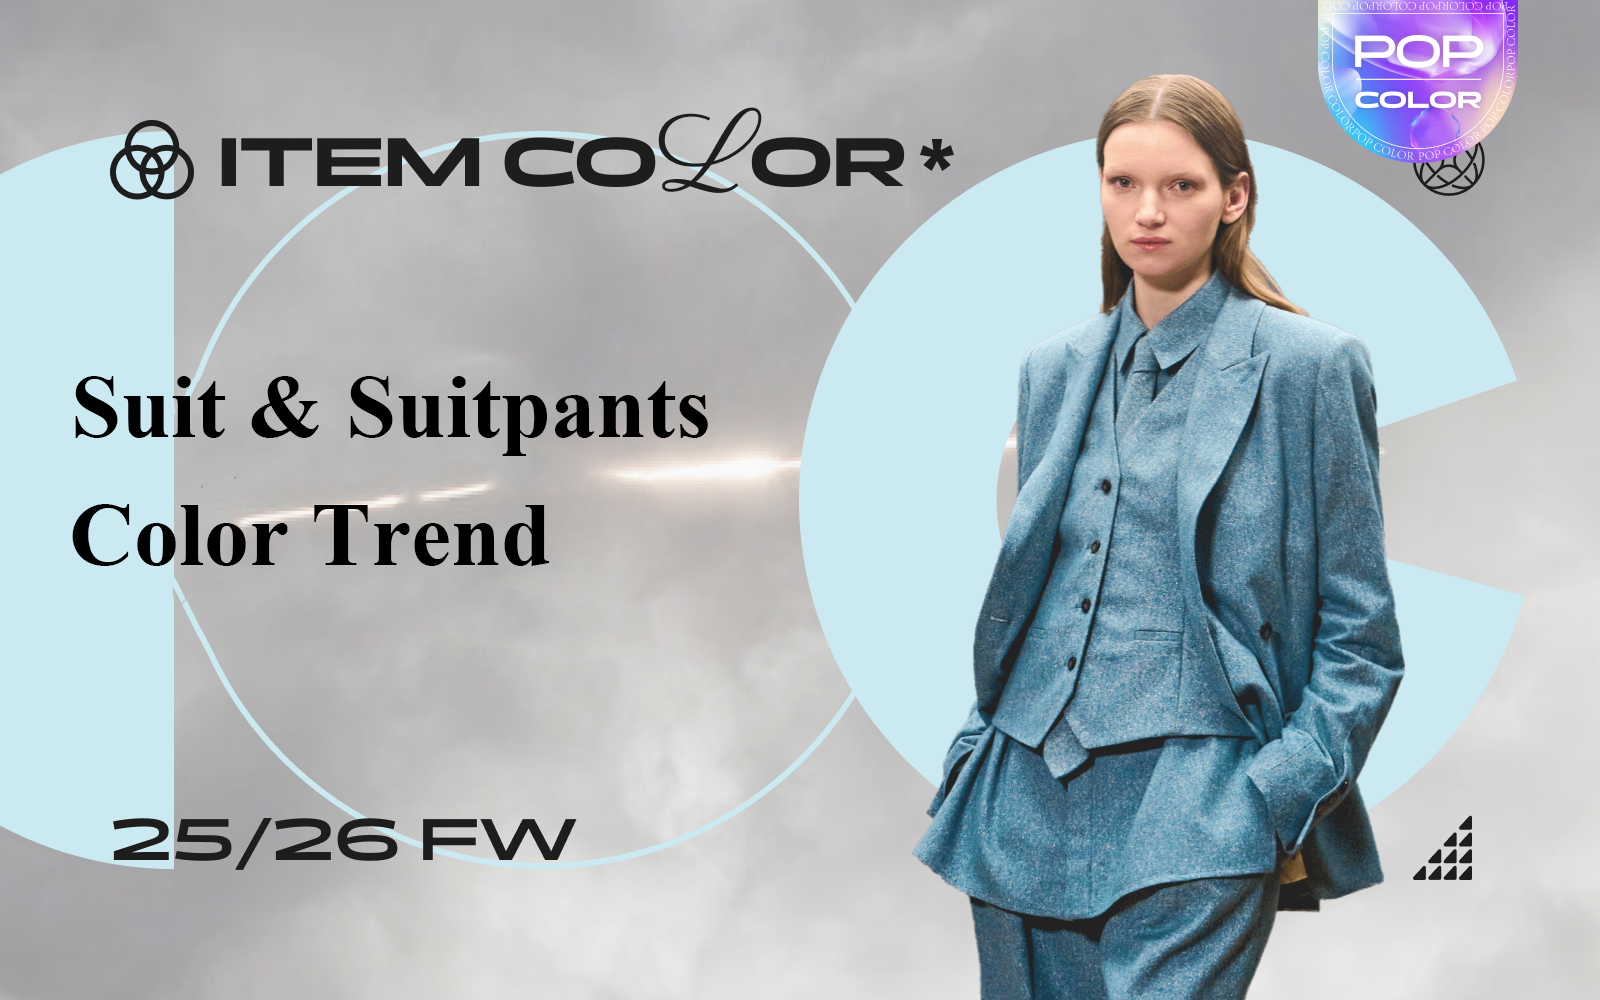 Intellectual Intelligence -- The A/W Color Trend of Suit & Suitpants